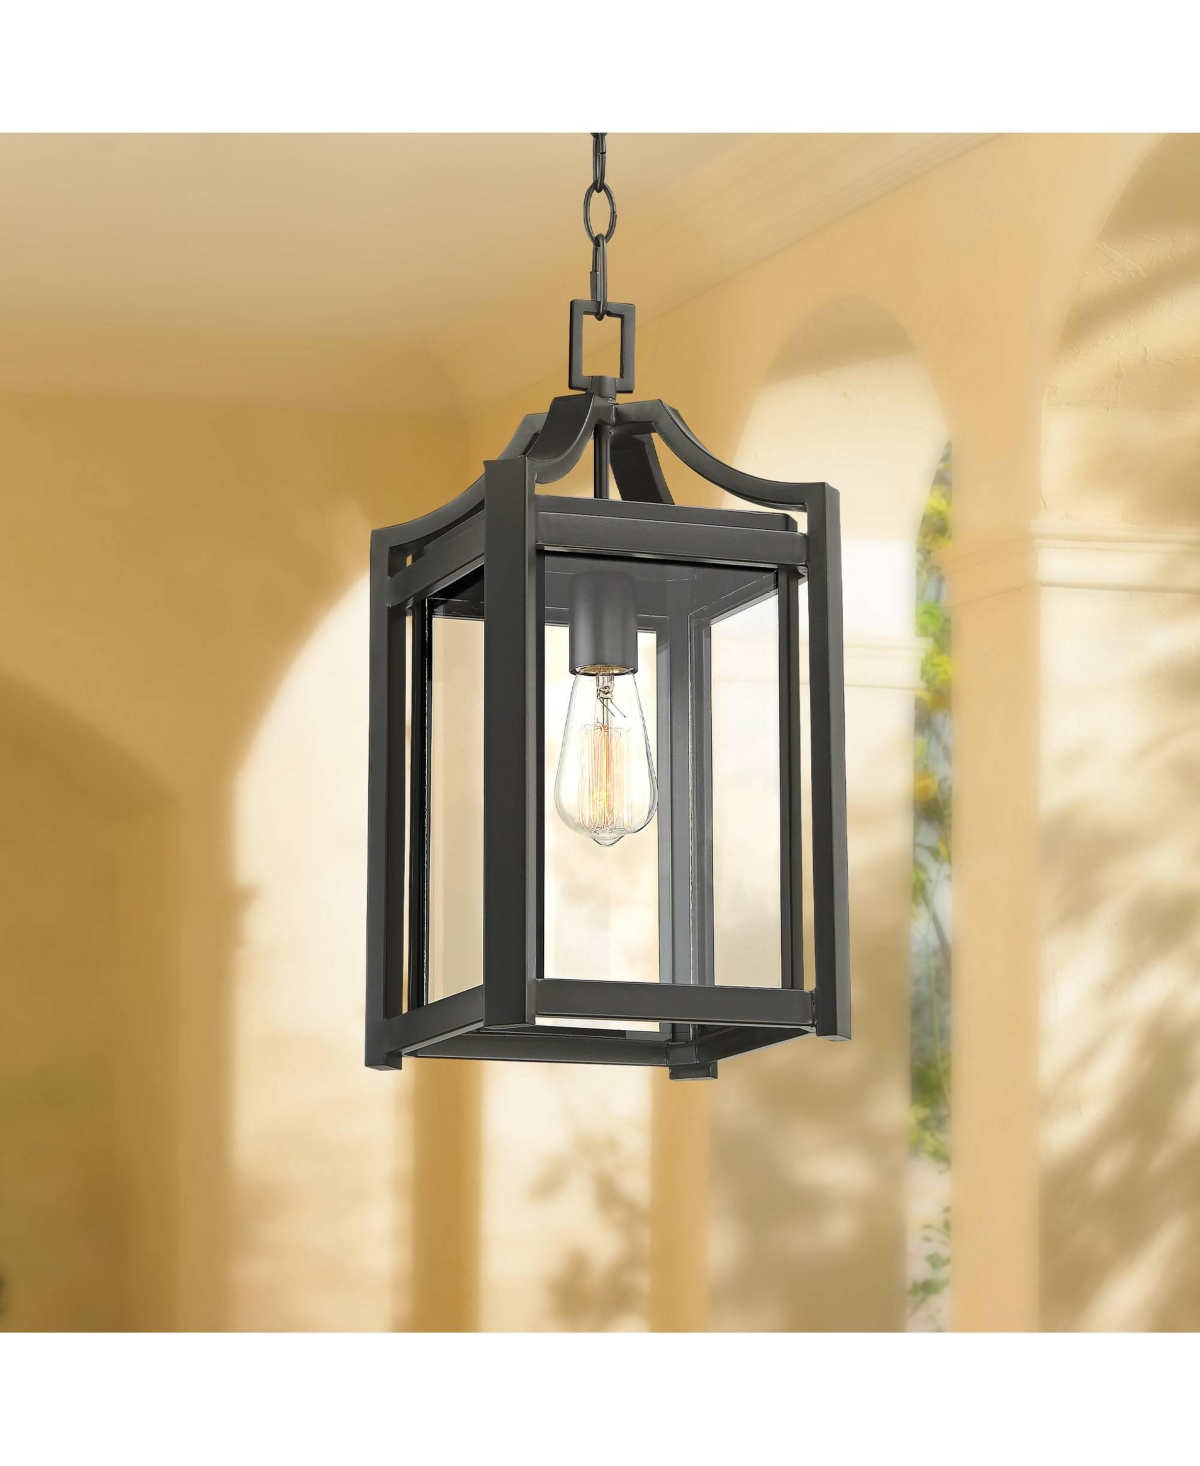 Rockford Farmhouse Rustic Outdoor Ceiling Light Hanging Black Iron 17" Clear Beveled Glass for Exterior House Porch Patio Outside Deck Garage Front Do